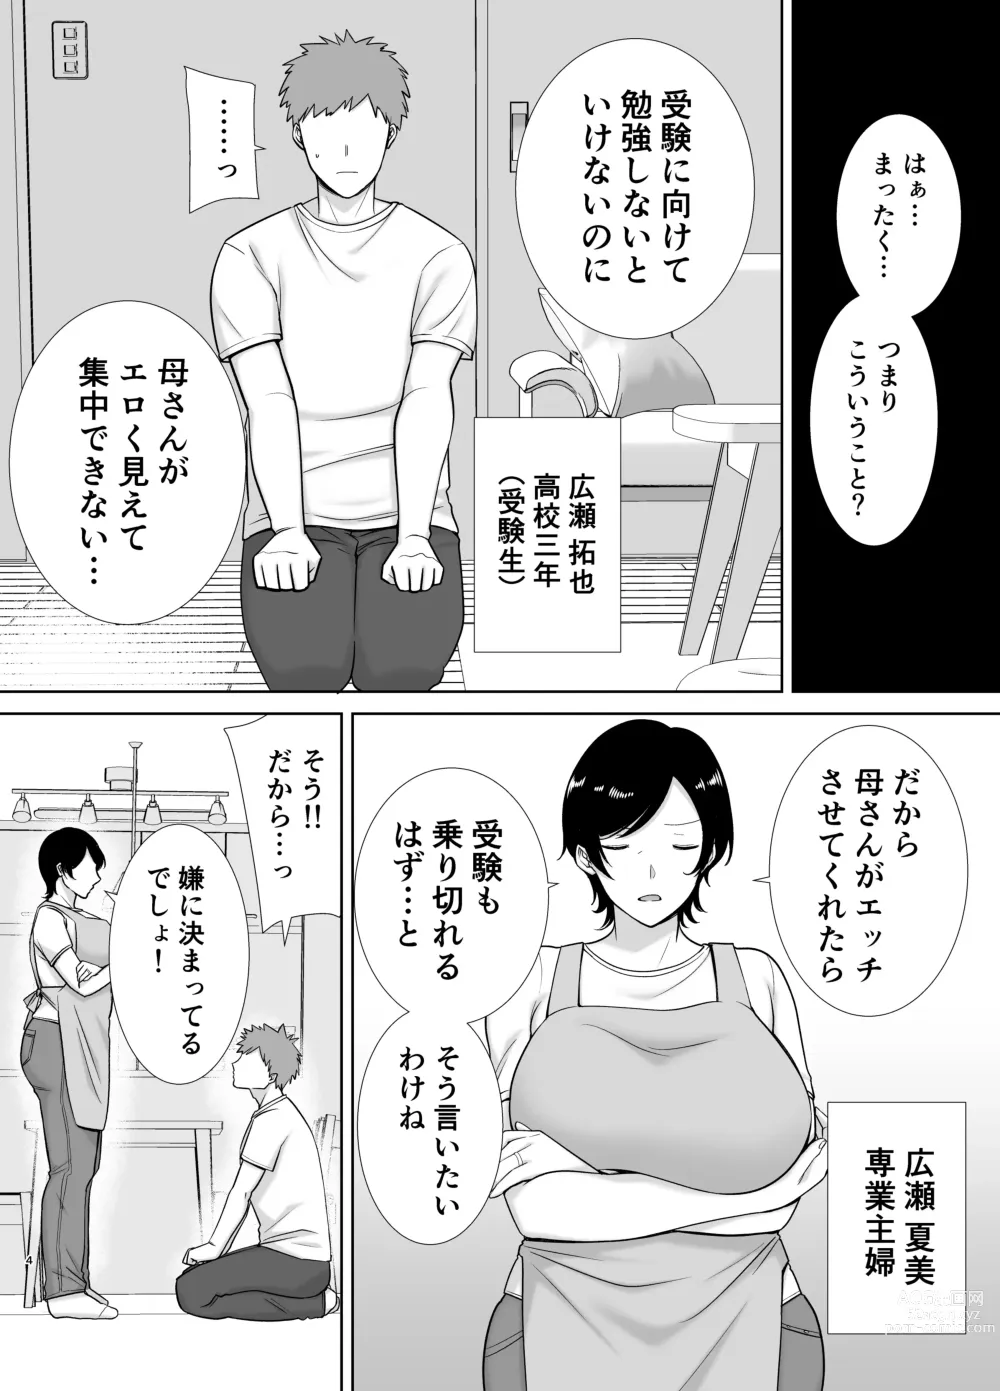 Page 3 of doujinshi 母さんだって女なんだよ！